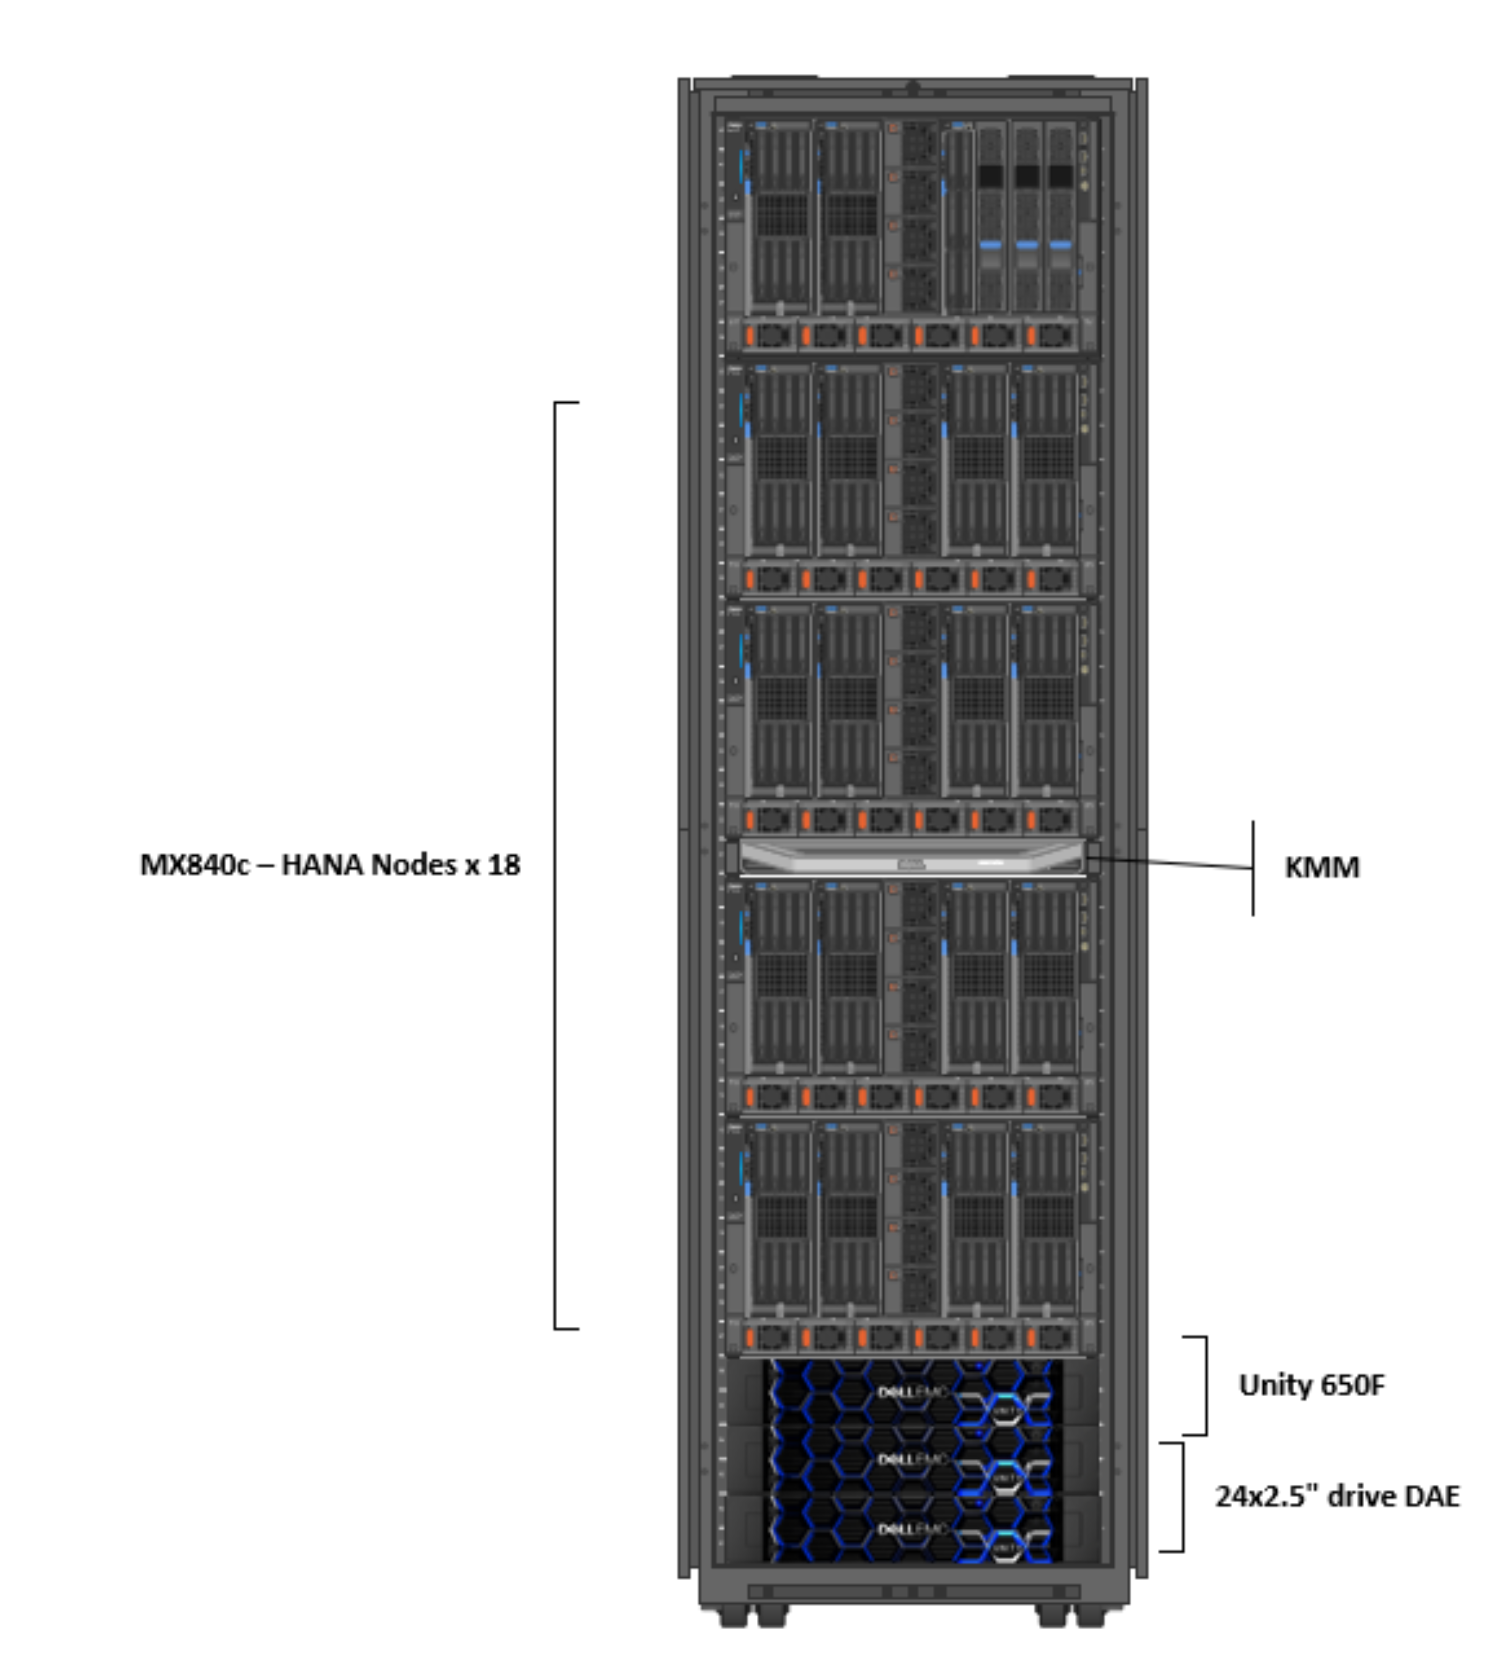 Screenshot showing a Dell SAP HANA (16+2) scale-out solution using PowerEdge MX